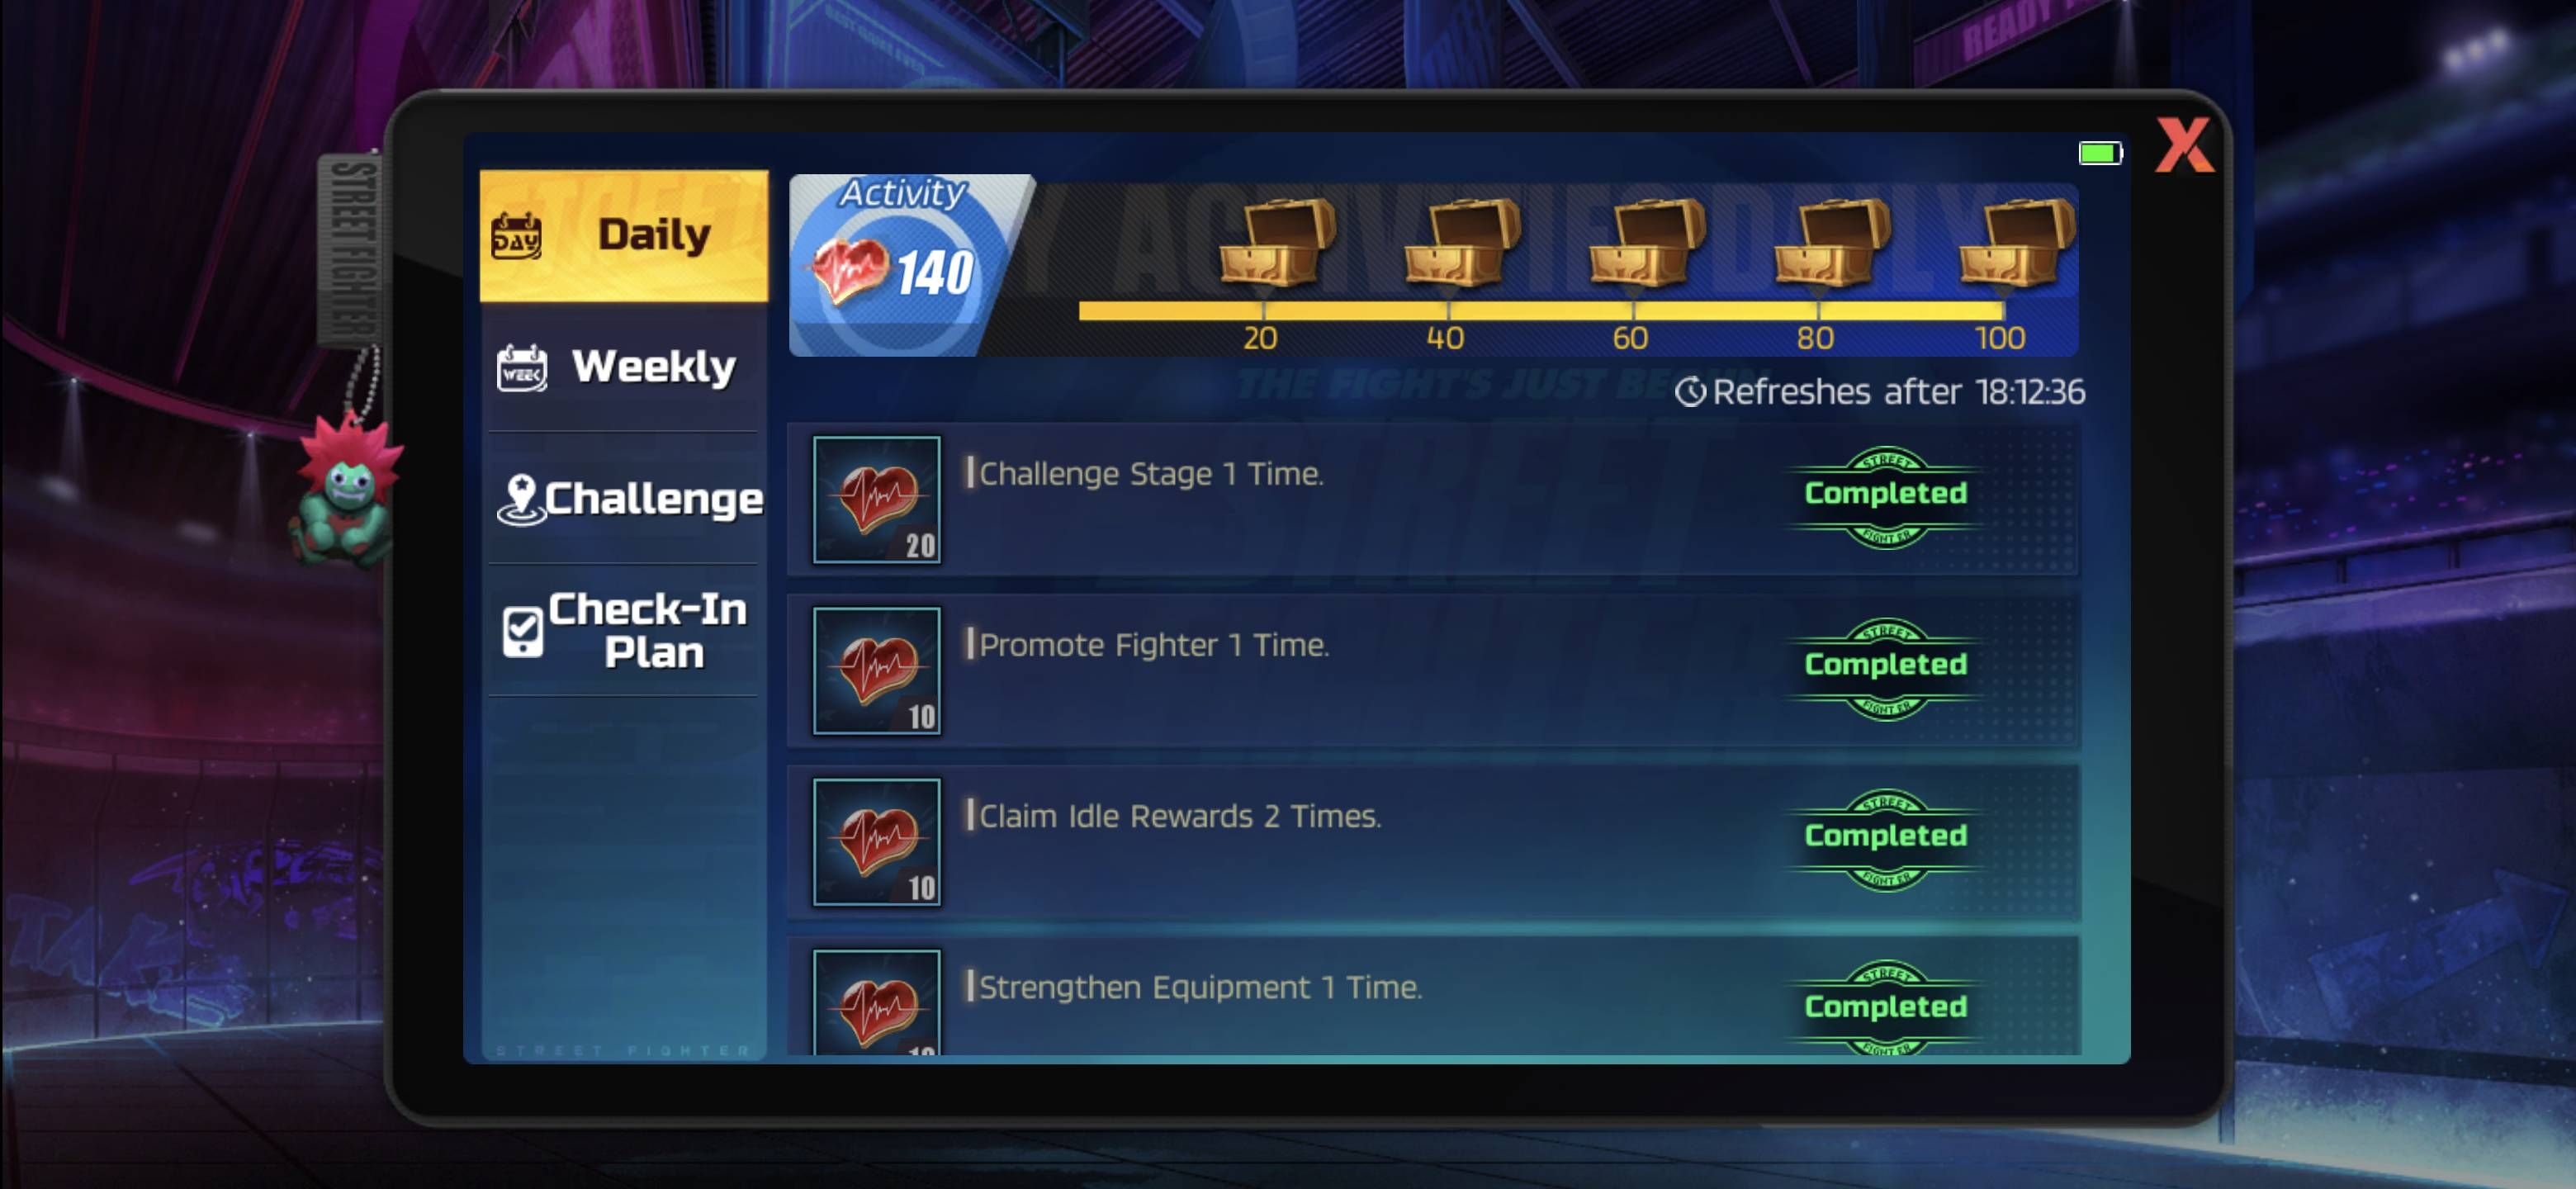 The Daily Missions screen in Street Fighter: Duel shows completed missions and claimed rewards.